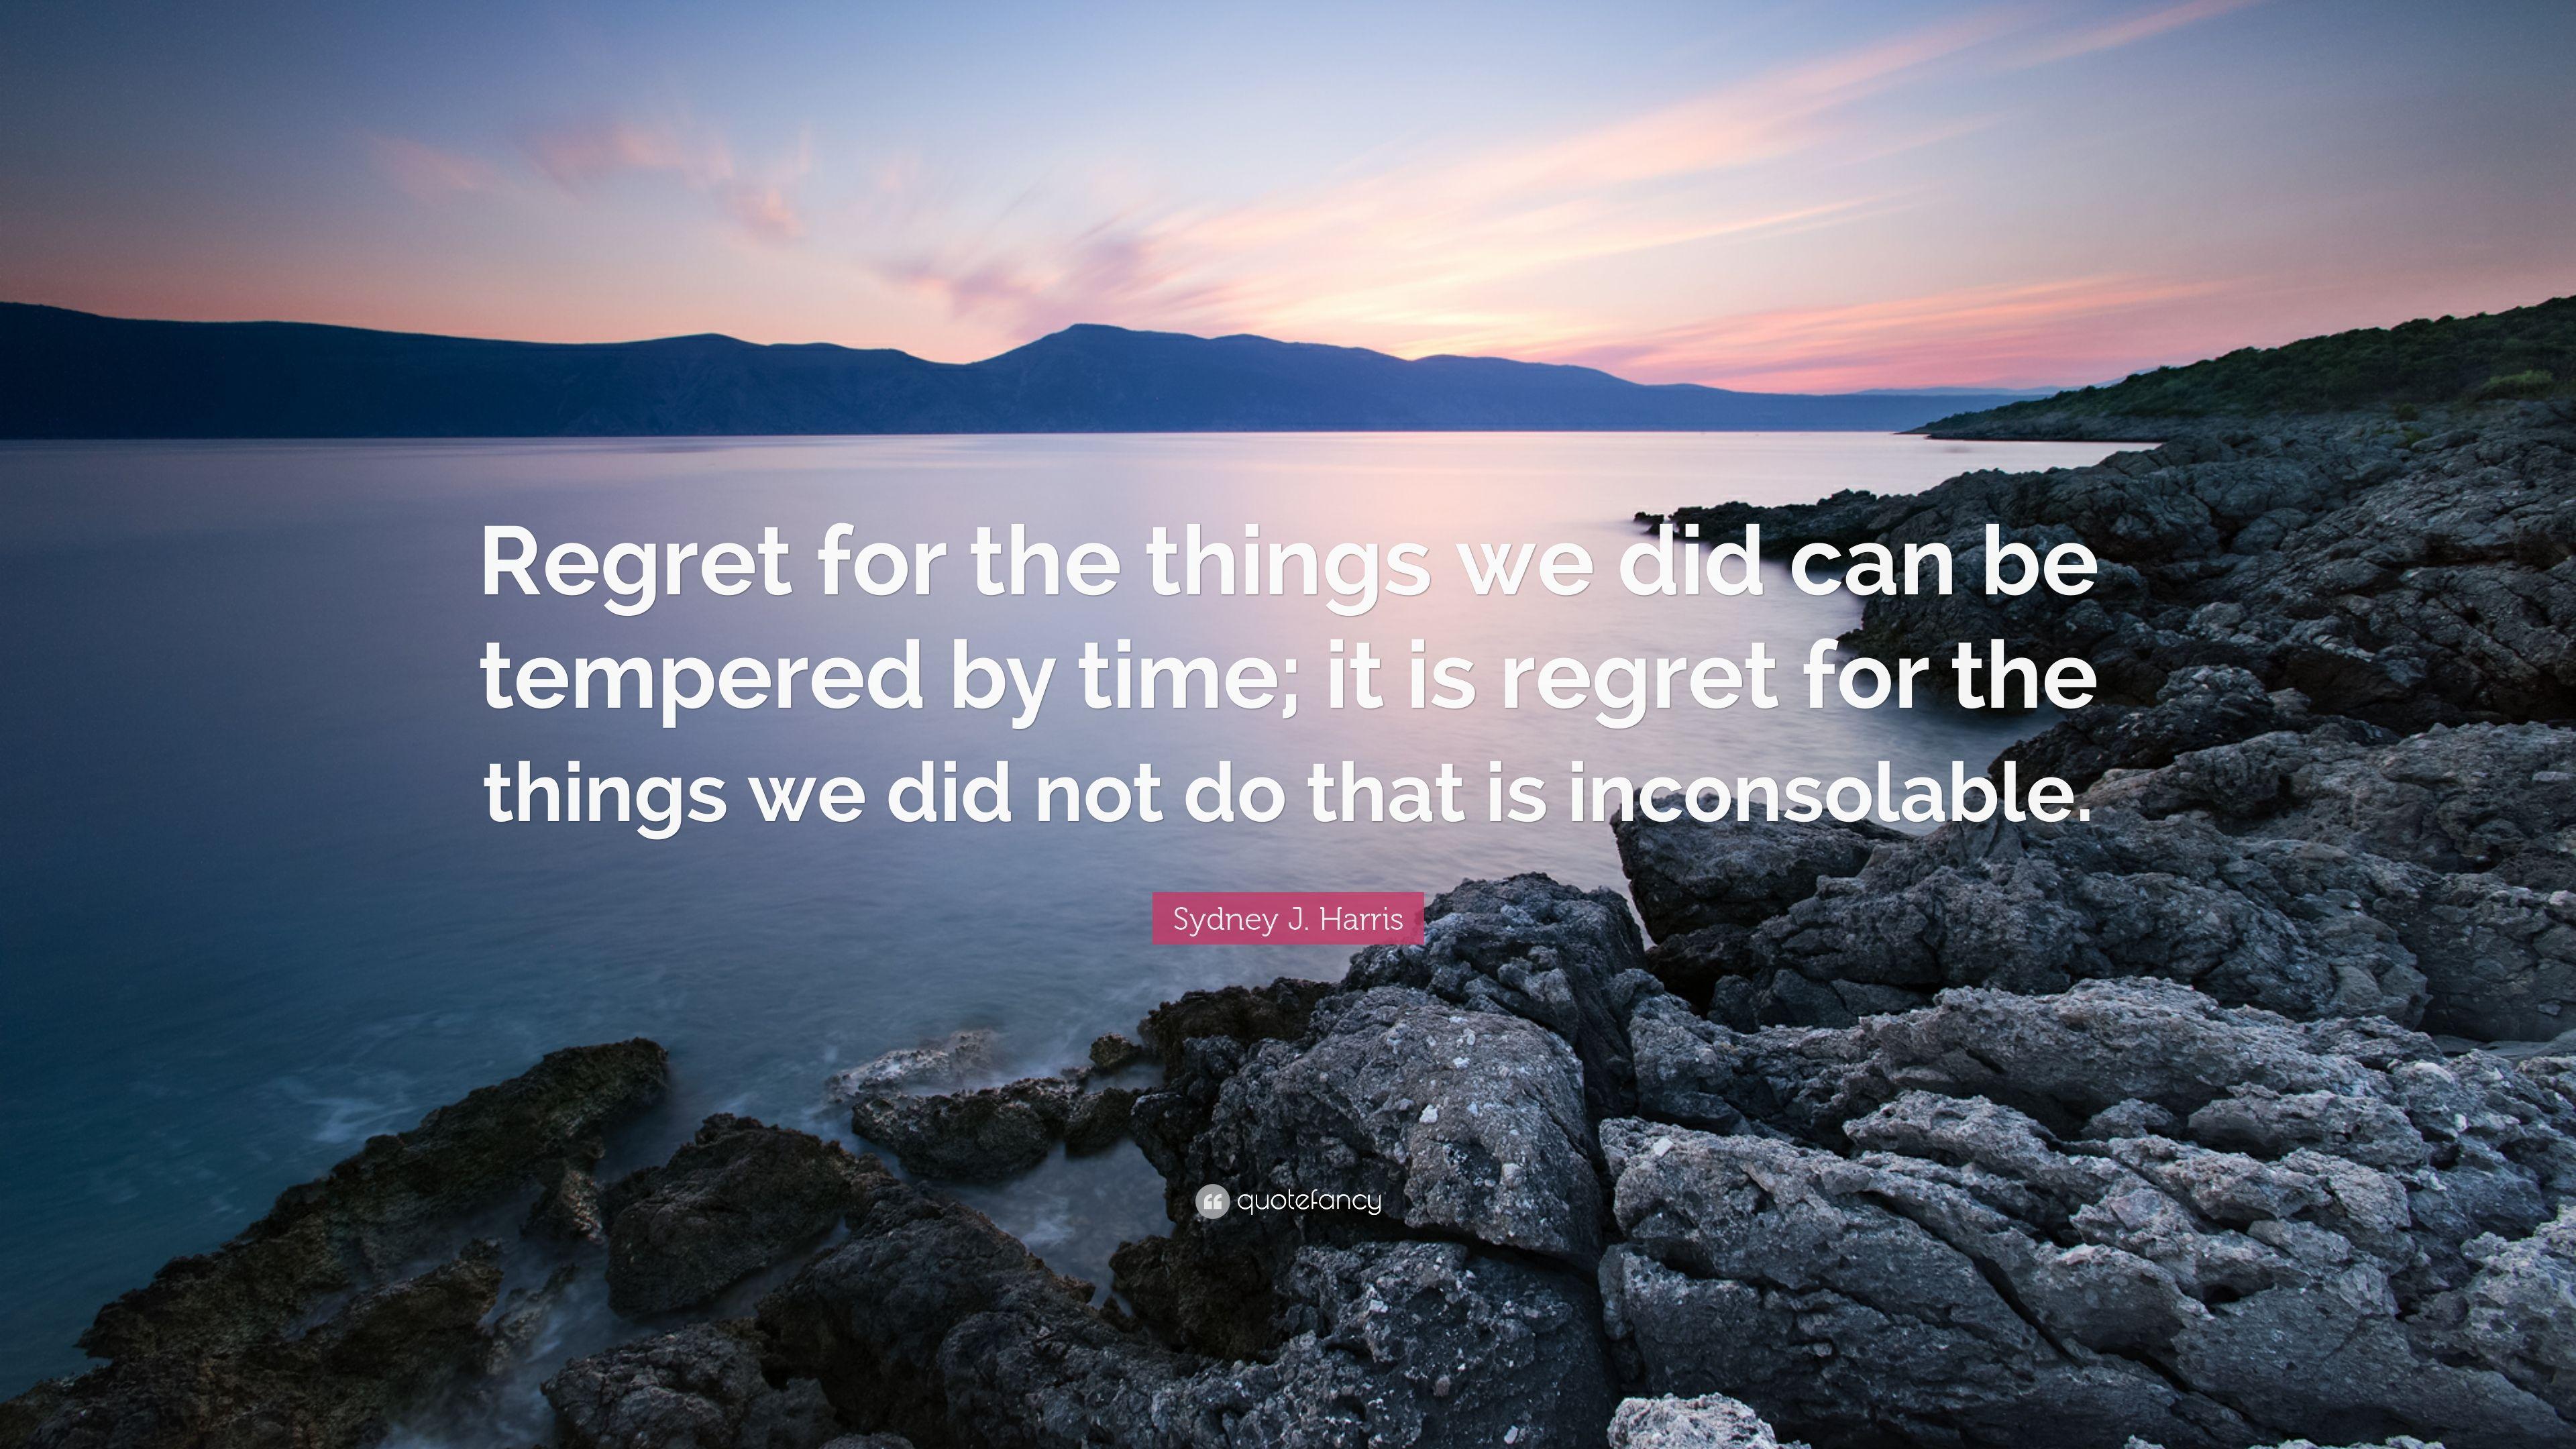 Sydney J. Harris Quote: “Regret for the things we did can be